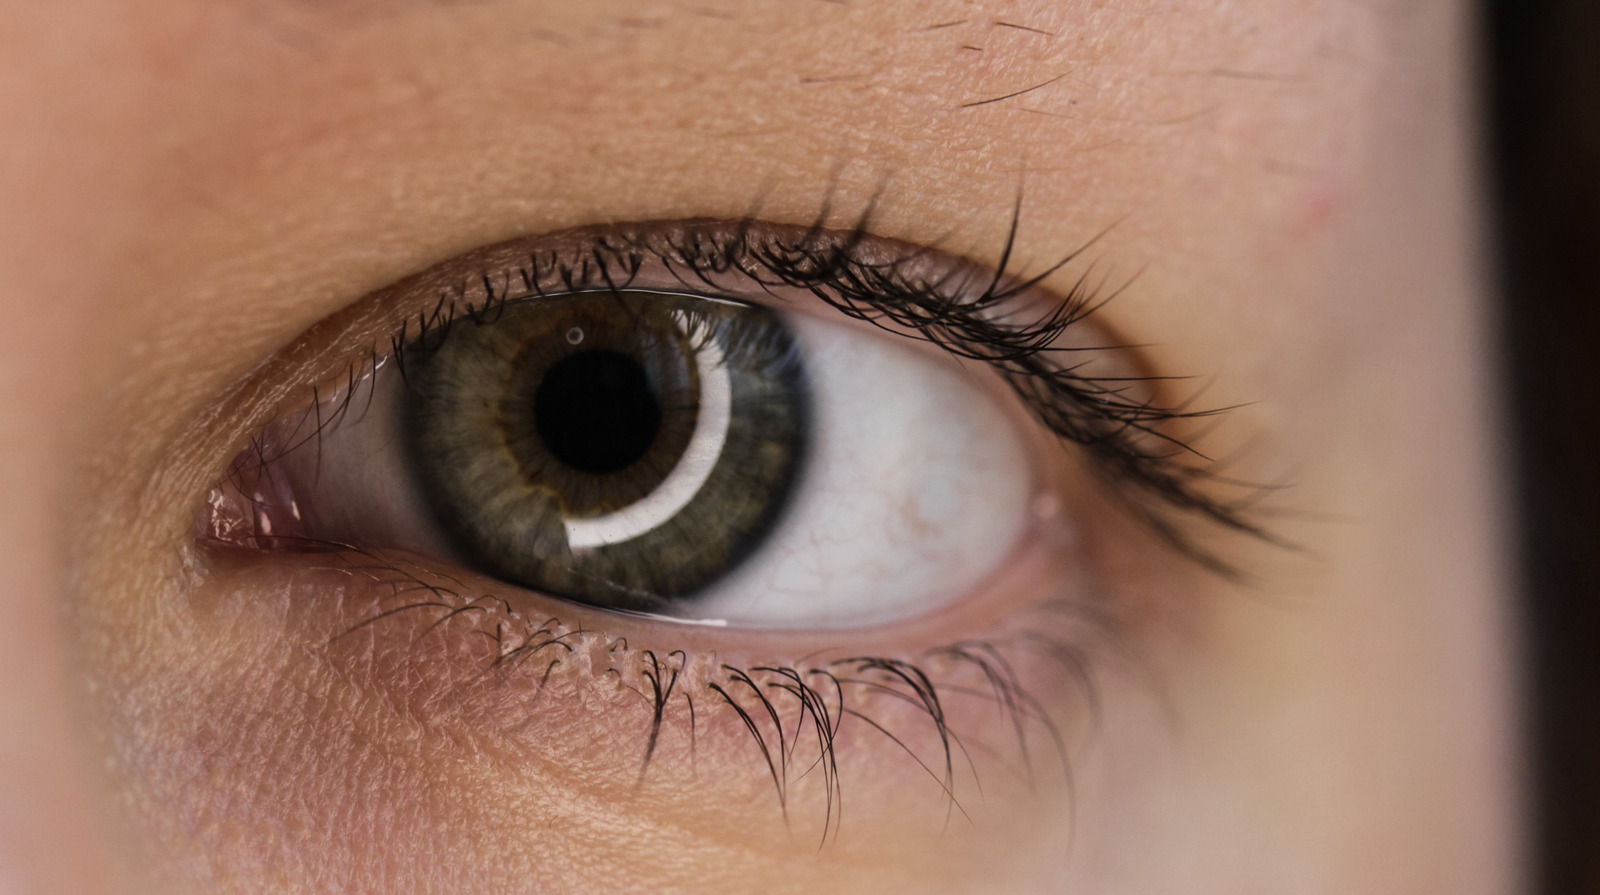 Treating Diabetic Eye Disease May Benefit From A New Approach